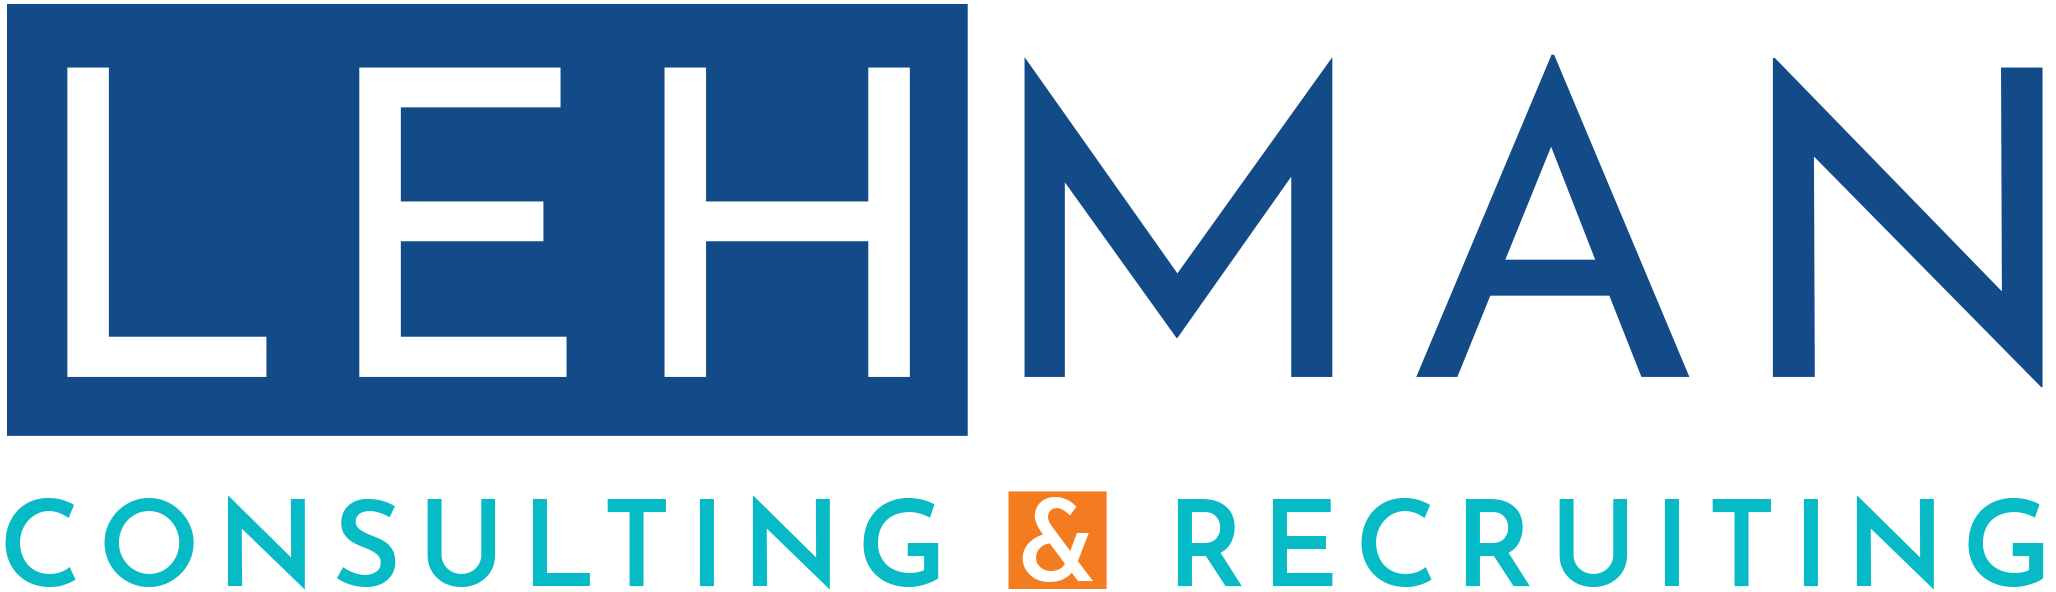 Lehman consulting and recruiting logo